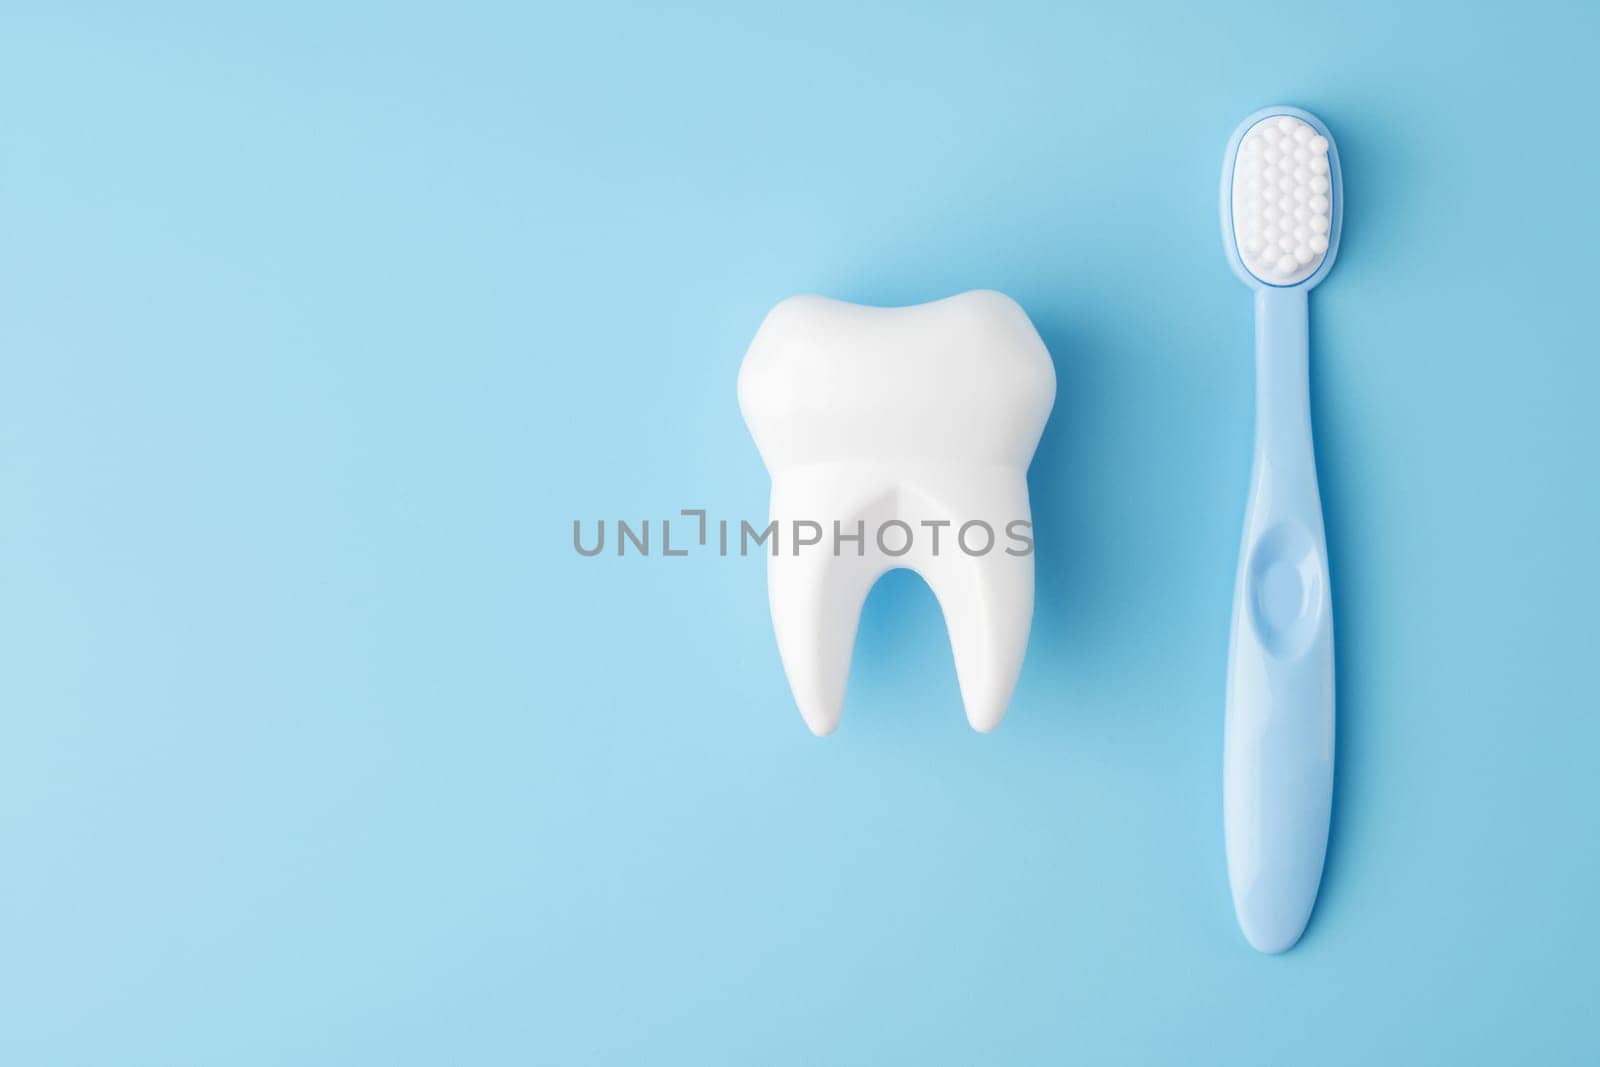 Toy tooth and toothbrush on blue background, flat lay by andreyz